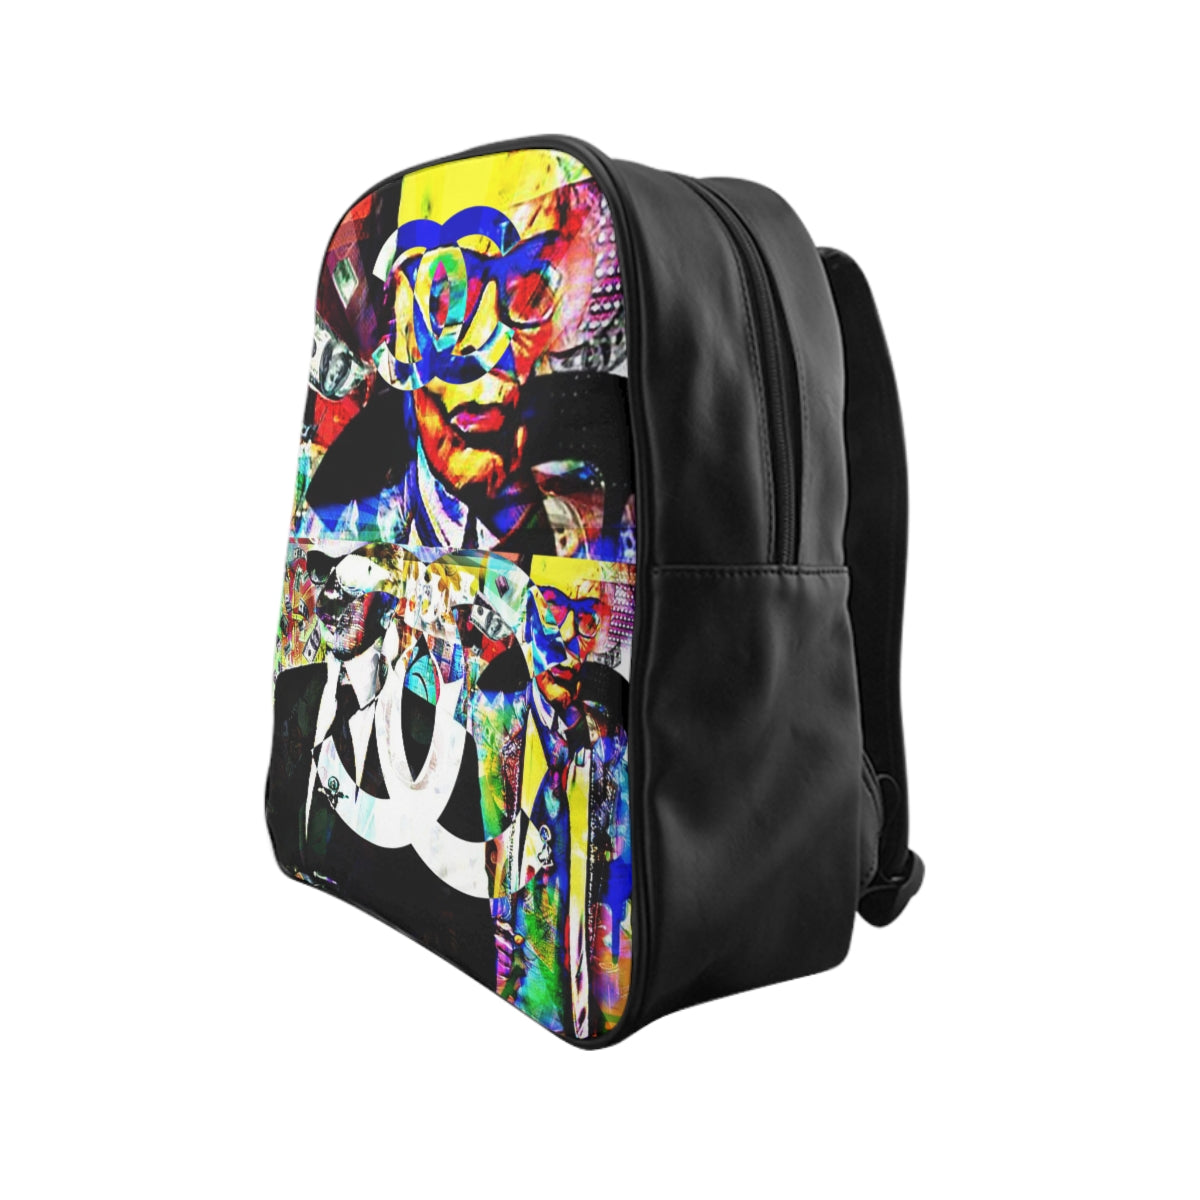 Getrott Inspired by C h a n e l Graffiti School Backpack Carry-On Travel Check Luggage 4-Wheel Spinner Suitcase Bag Multiple Colors and Sizes-Bags-Geotrott